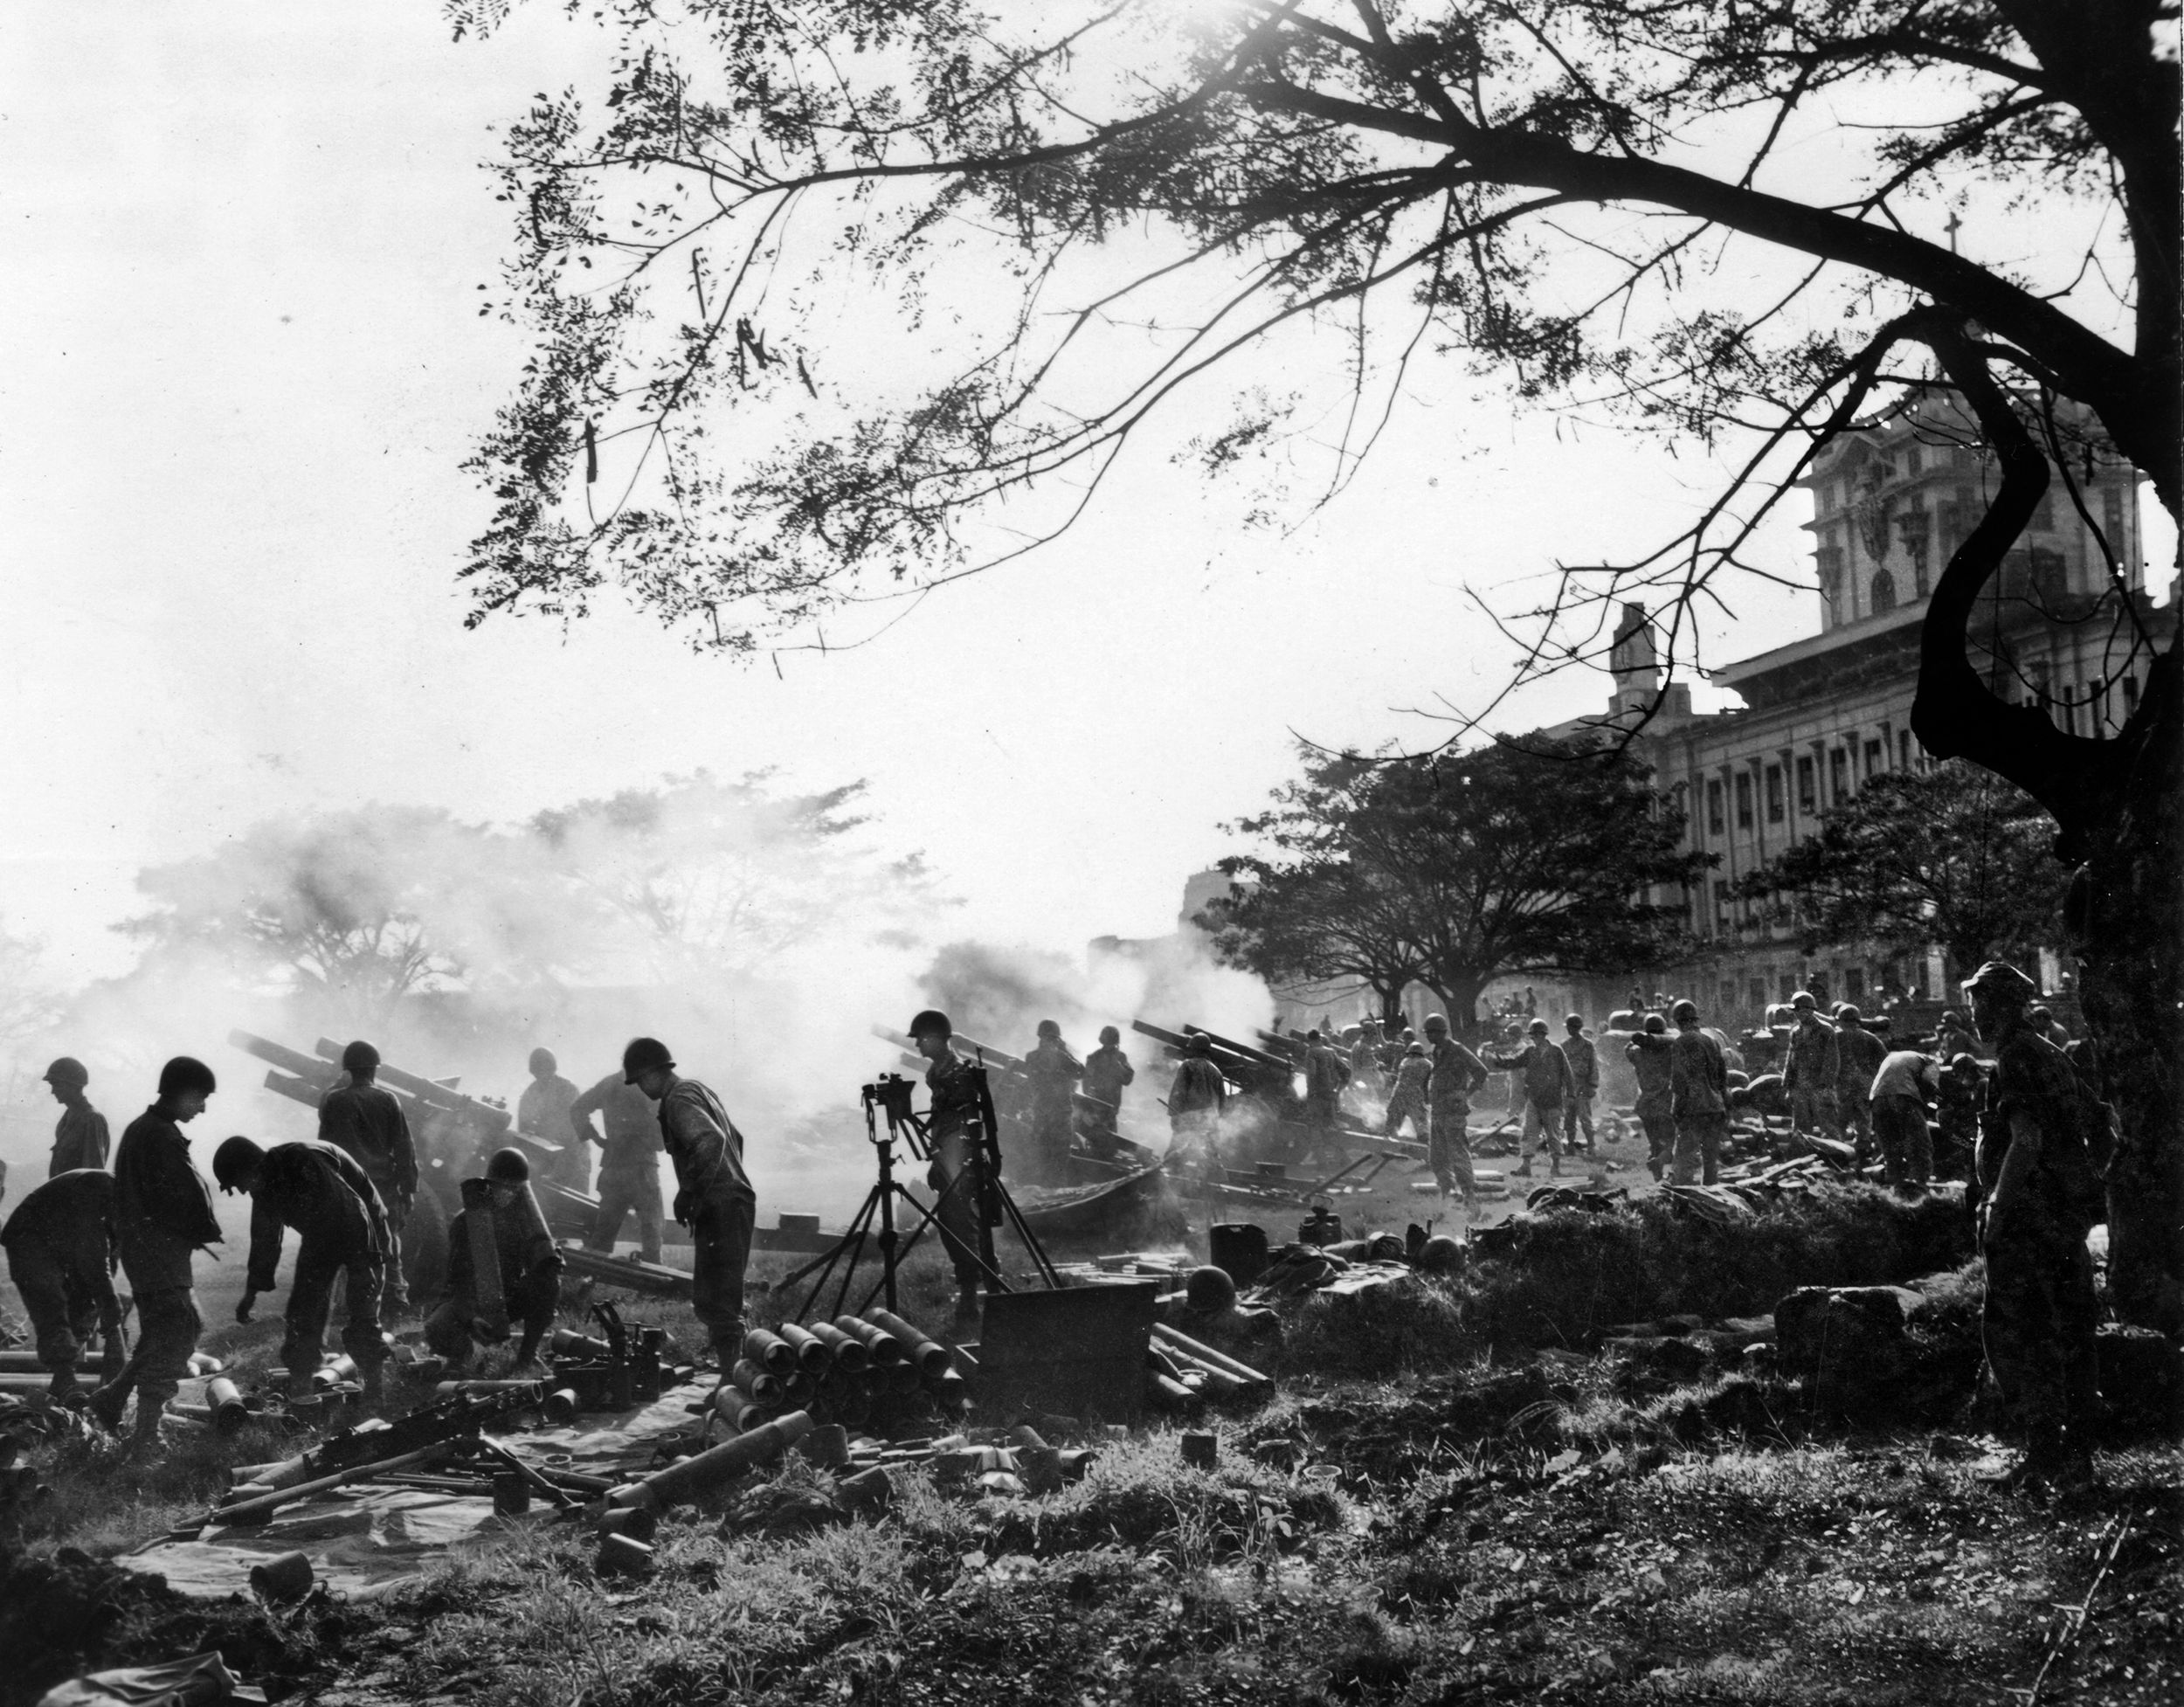 On February 5, 1945, American soldiers service their 105mm howitzers, firing against Japanese positions in the vicinity of Manila, from the grounds of Santo Tomas, where a university had been turned into a detention center for prisoners.